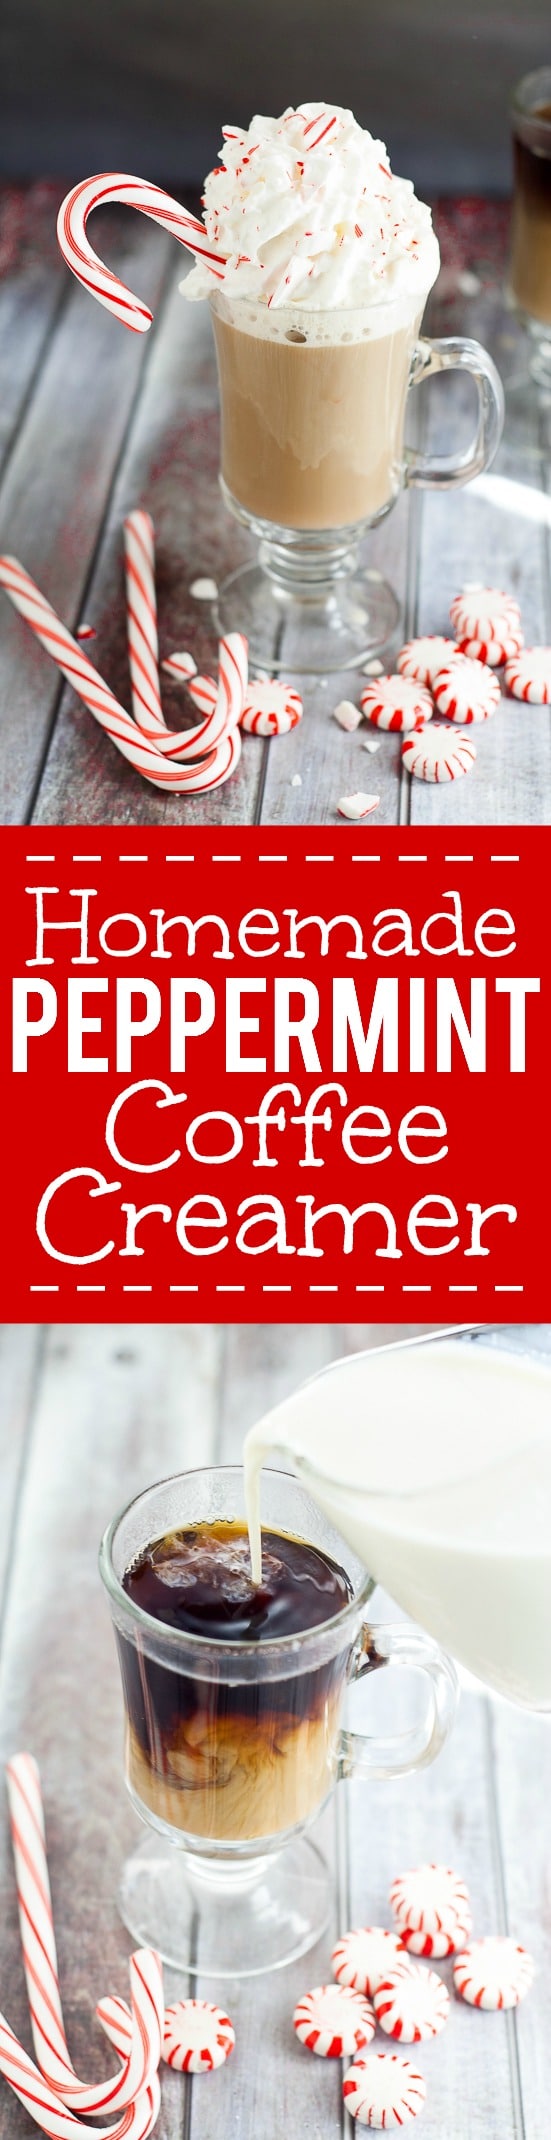 Homemade Peppermint Coffee Creamer Recipe - This Homemade Peppermint Coffee Creamer recipe is a festive way to enjoy your coffee and get more done during the holiday season. Sweet peppermint in hot coffee... Mmmm... Seriously so easy to make.  Peppermint coffee during Christmas is my absolute favorite!